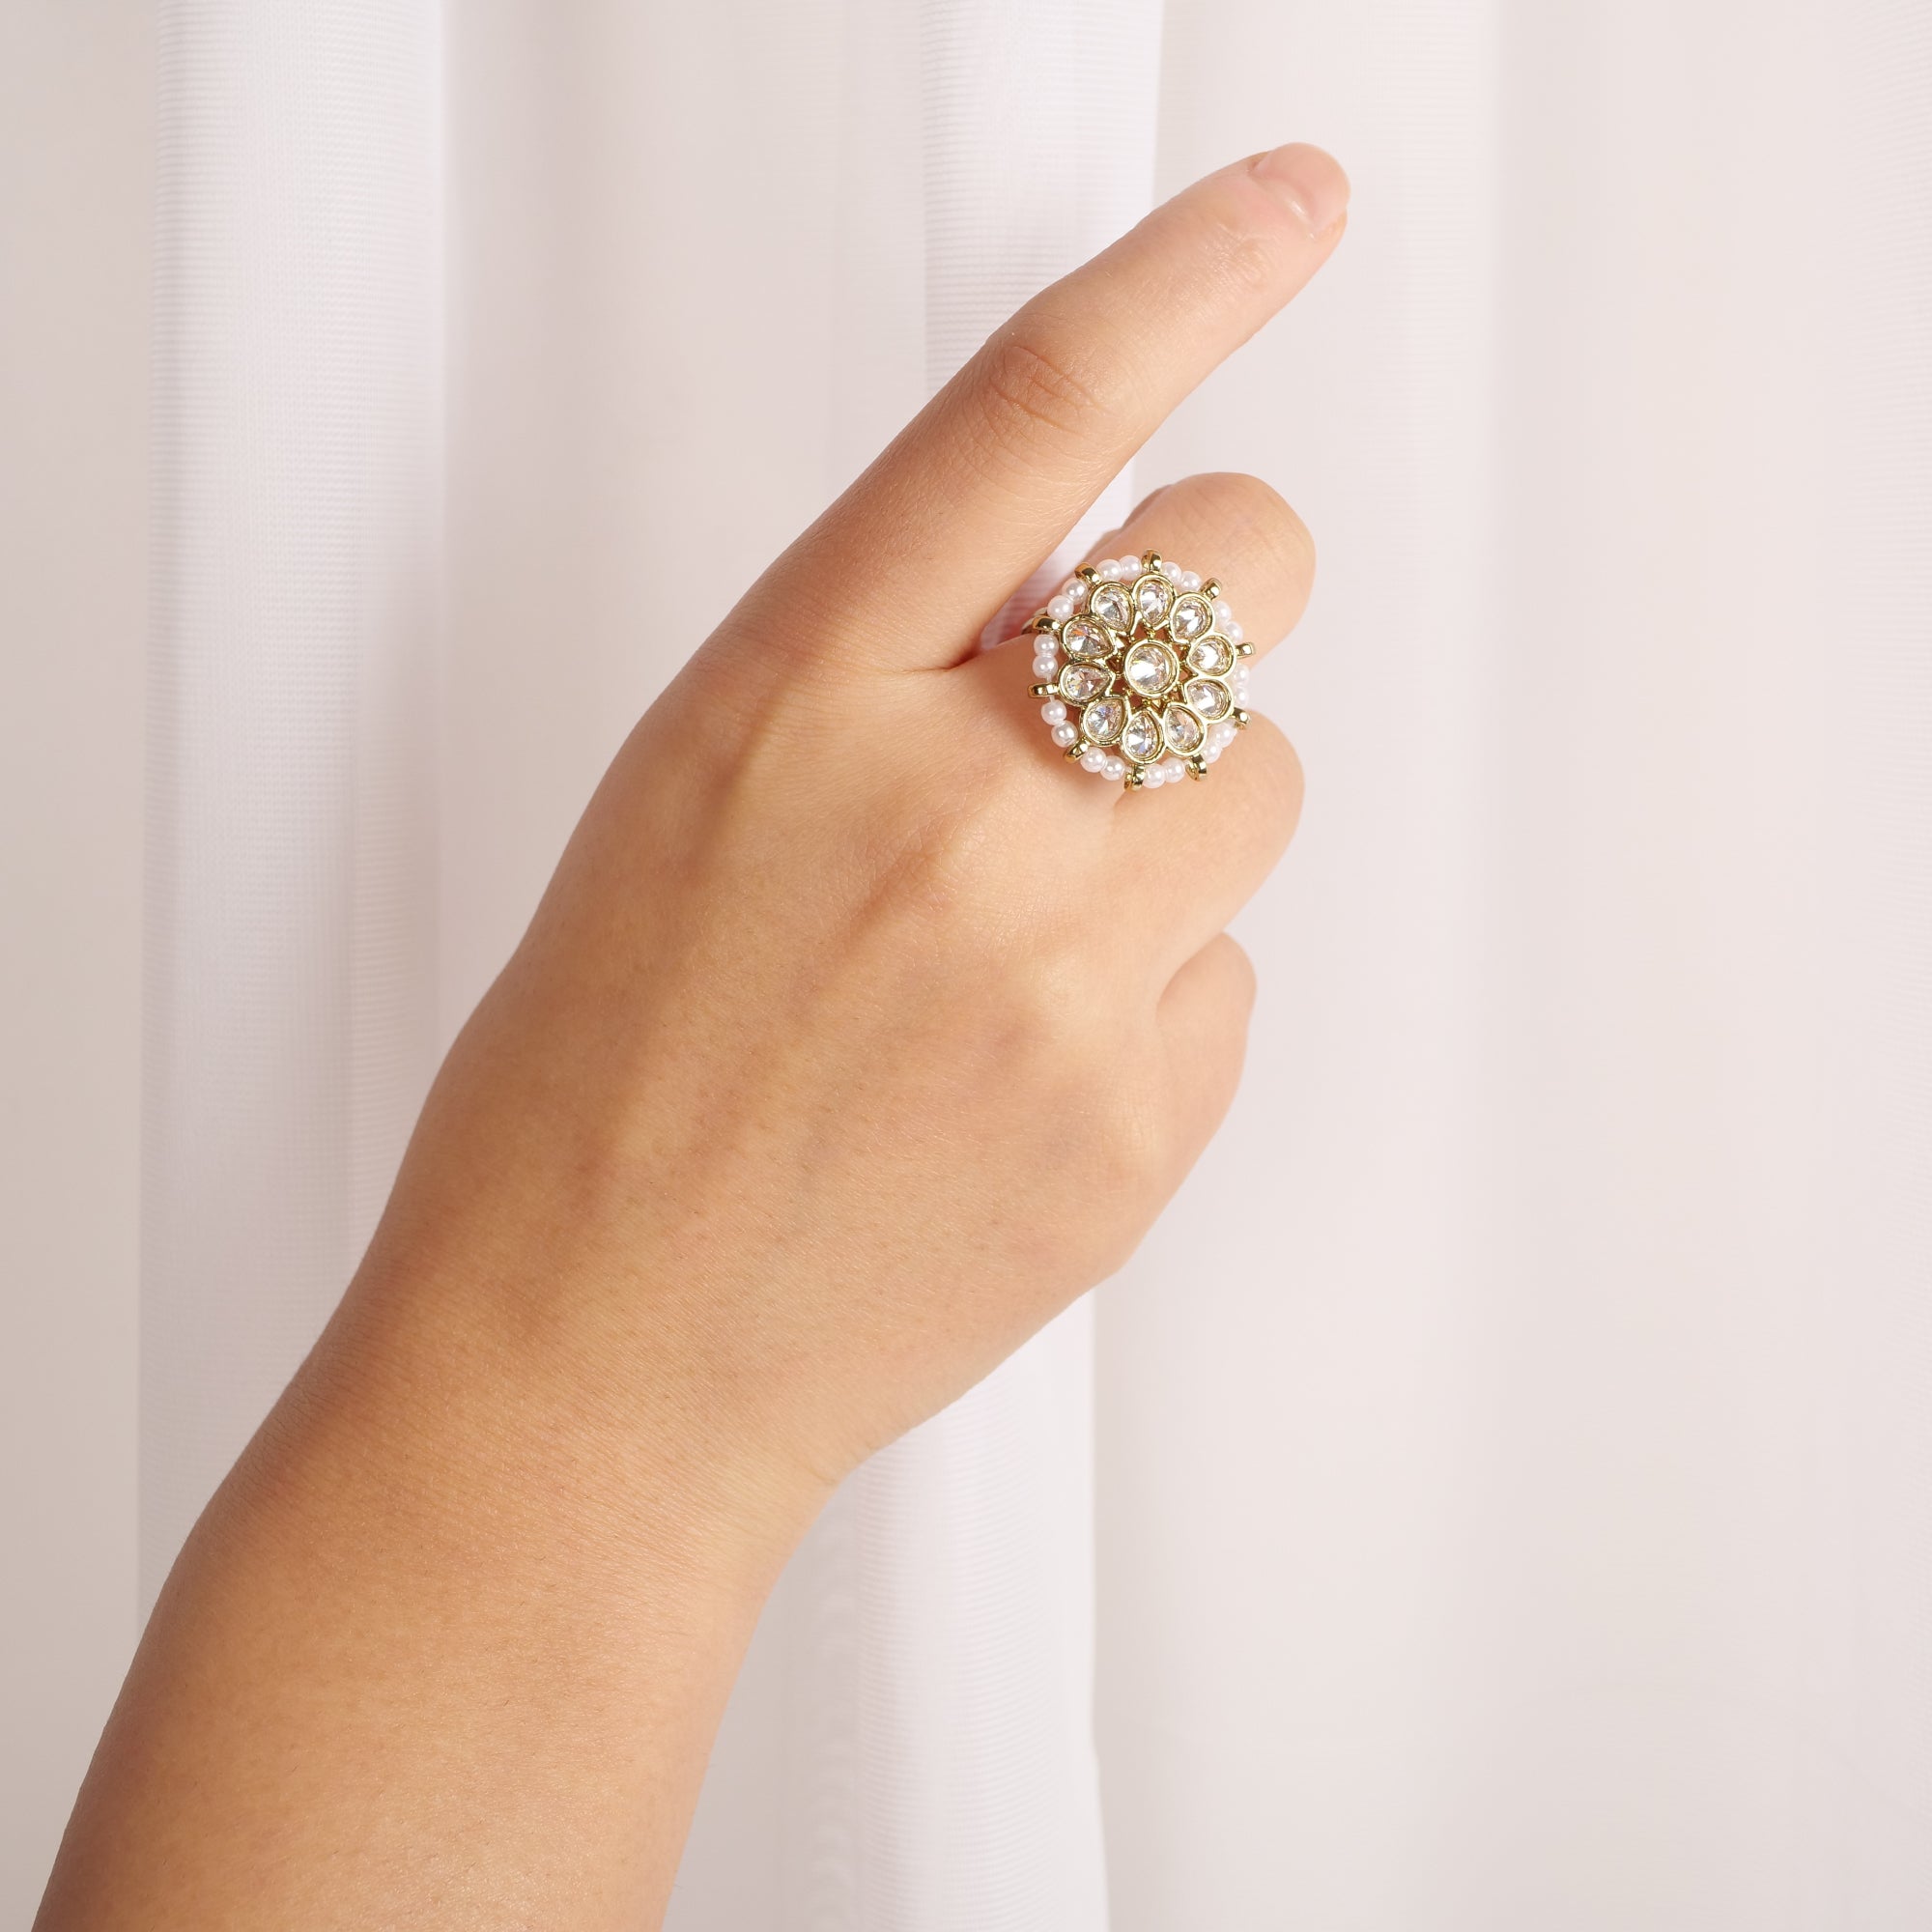 Neepa Pearl and Crystal Ring in White